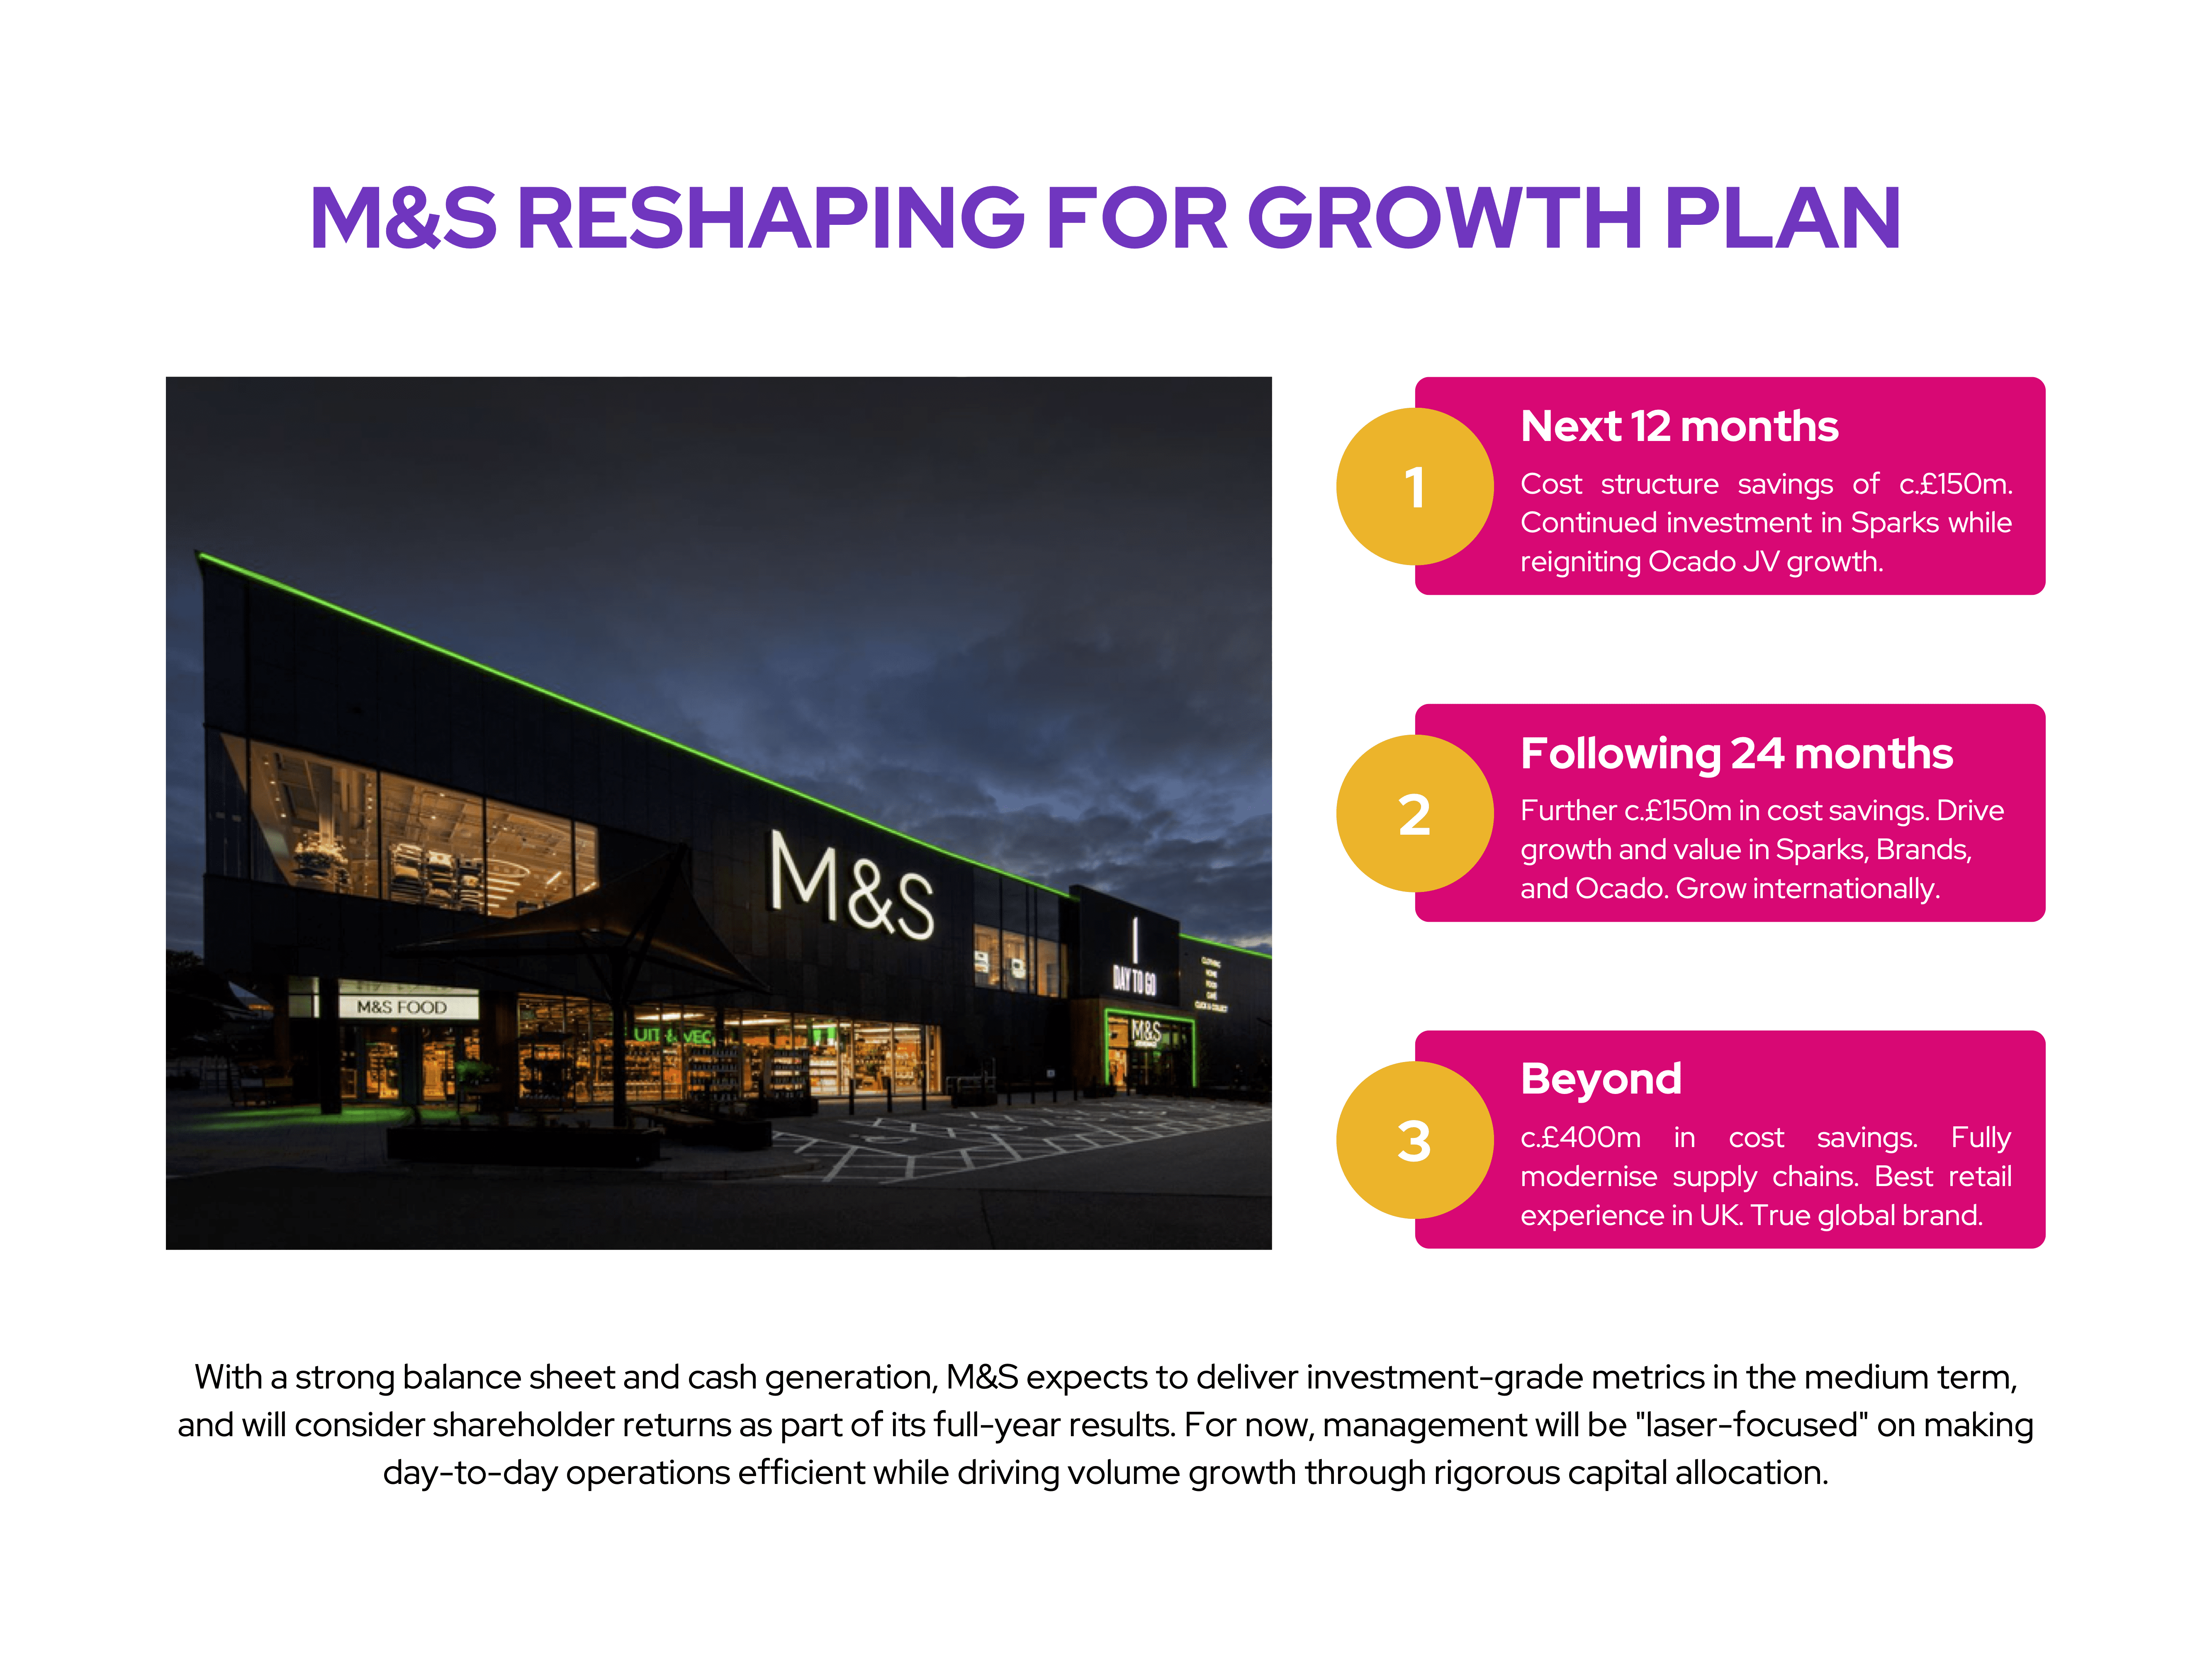 M&S: Reshaping for Growth Plan